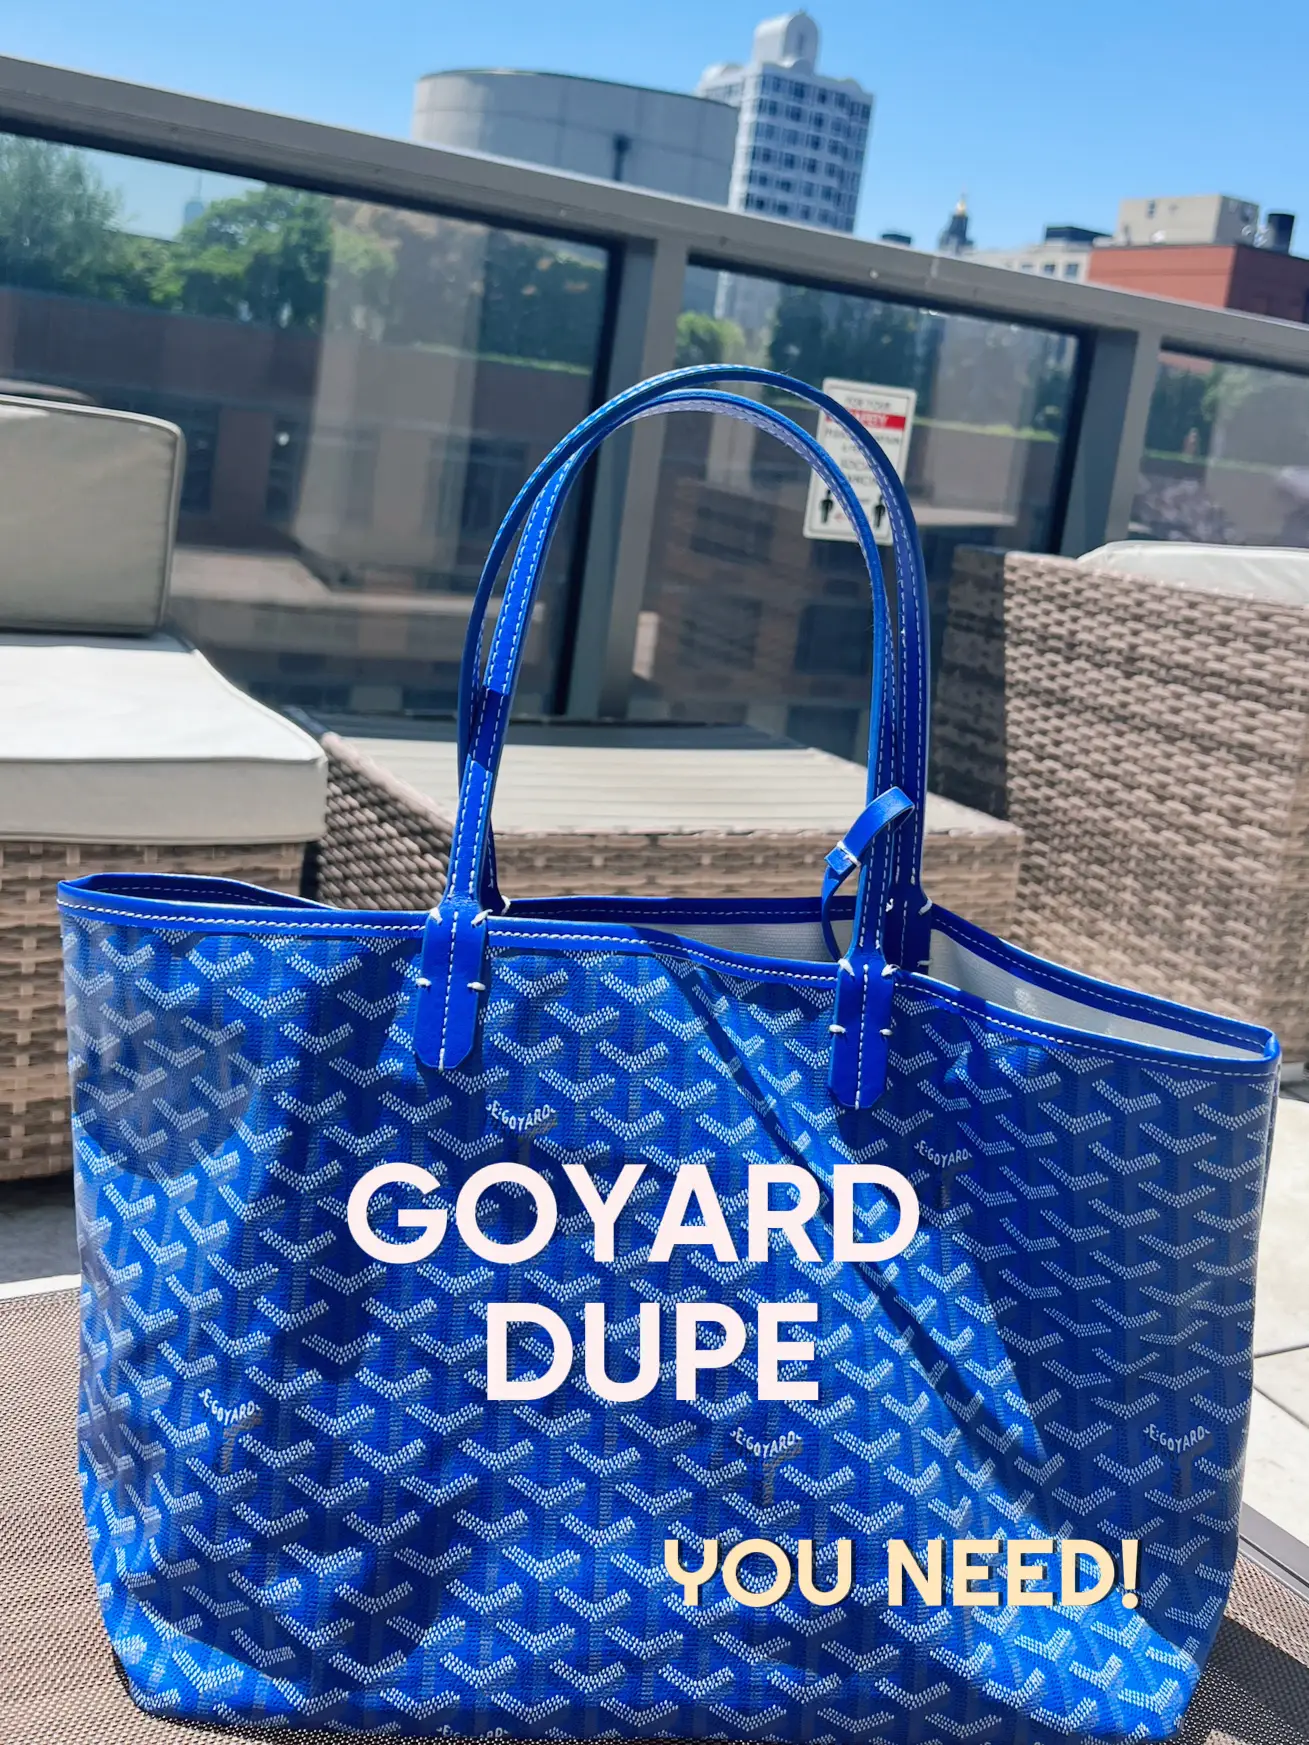 Goyard tote bag comparison! Comment below if you want to know the